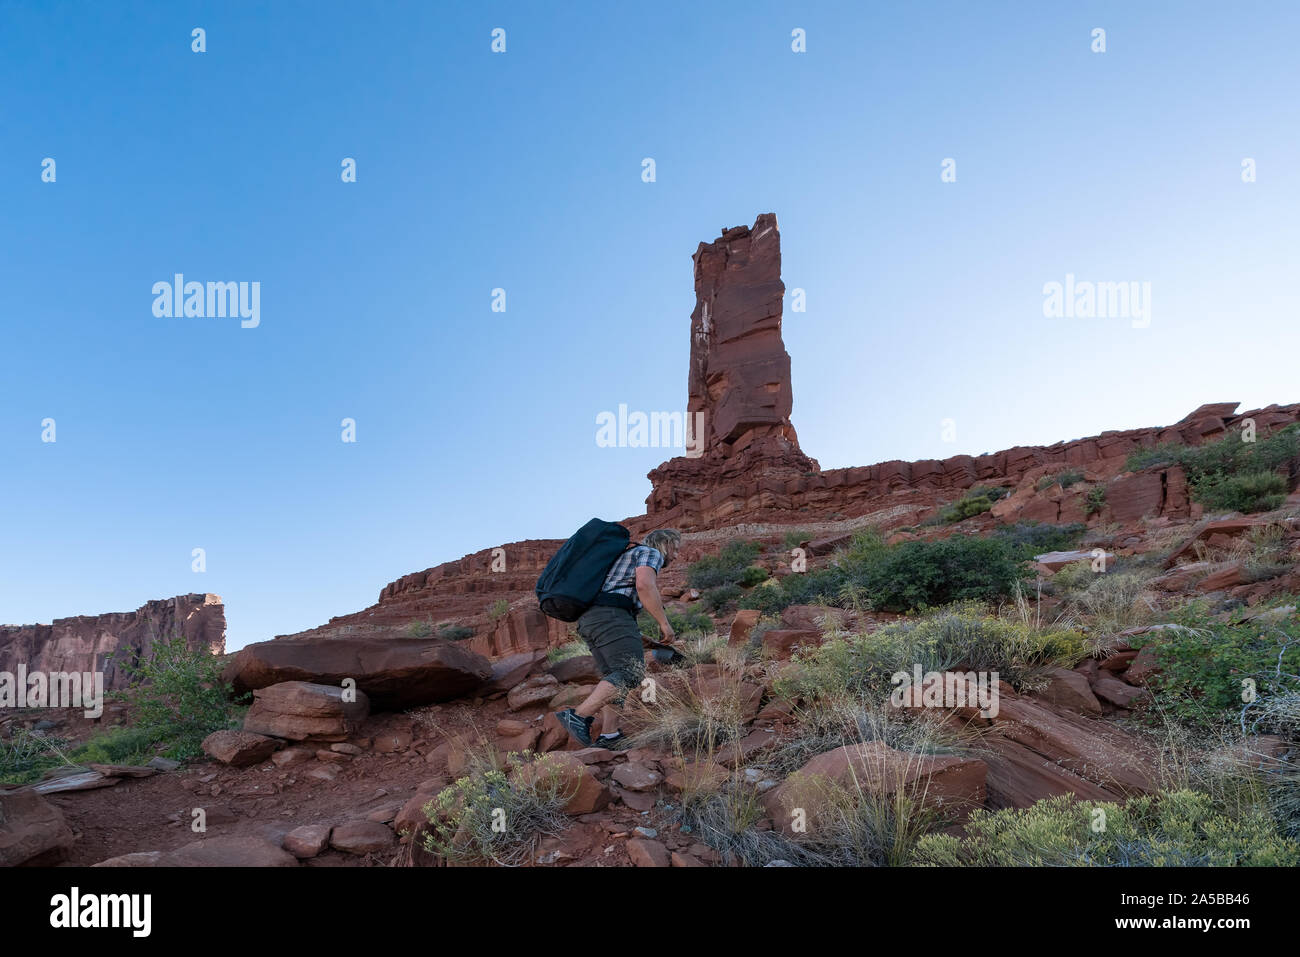 On the way to the route and climbing of Castleton tower in Moab, Utah, USA Stock Photo